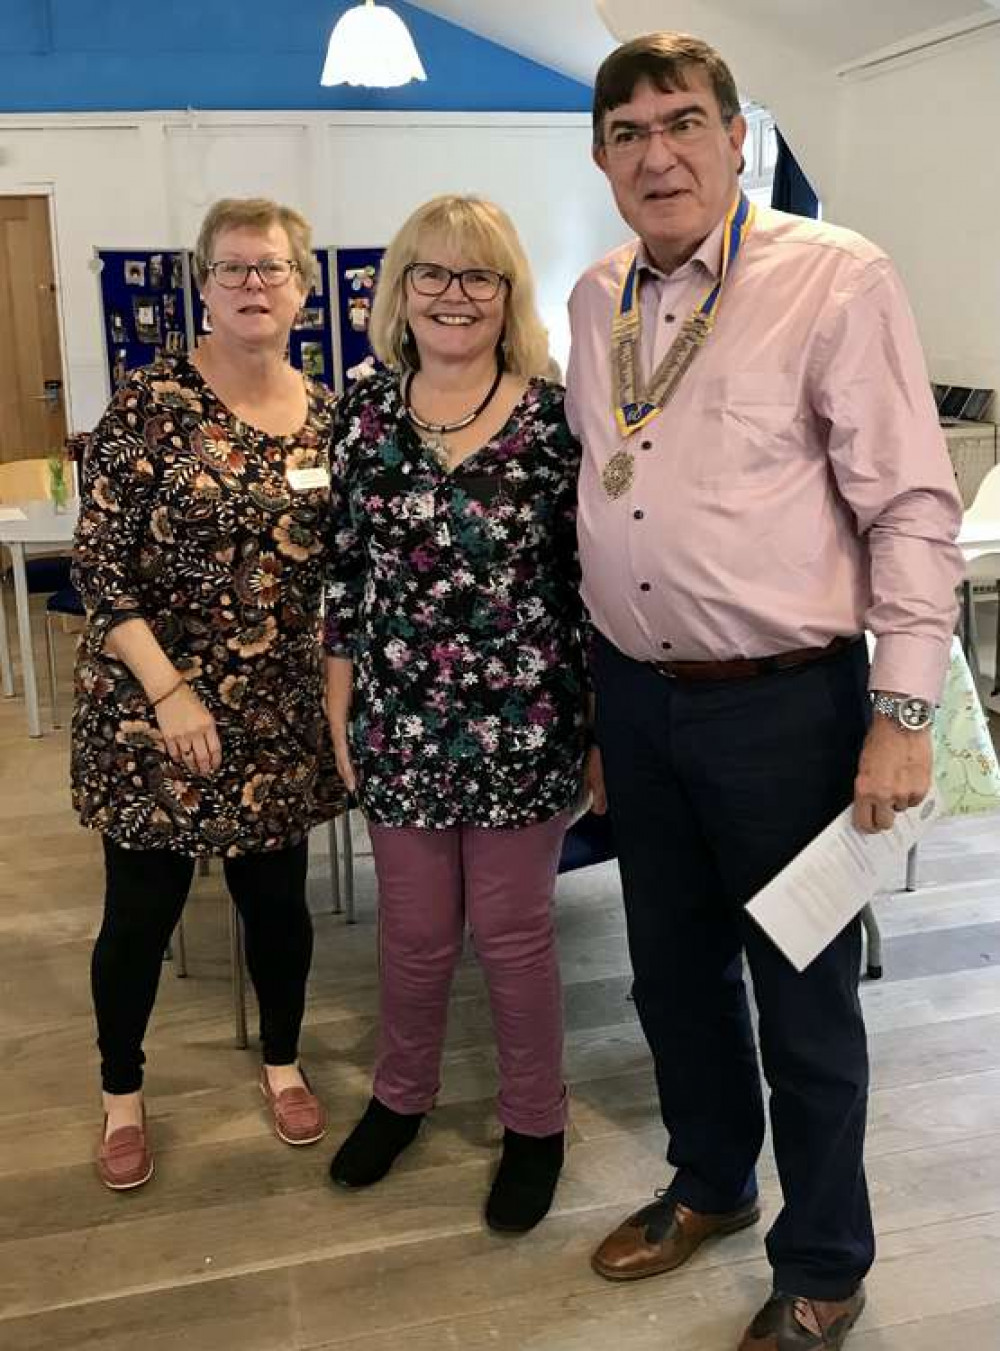 Rotary's Newest Member, Jayne Hutton, pictured with club member, Mandy Dando & club president, Nick Candy